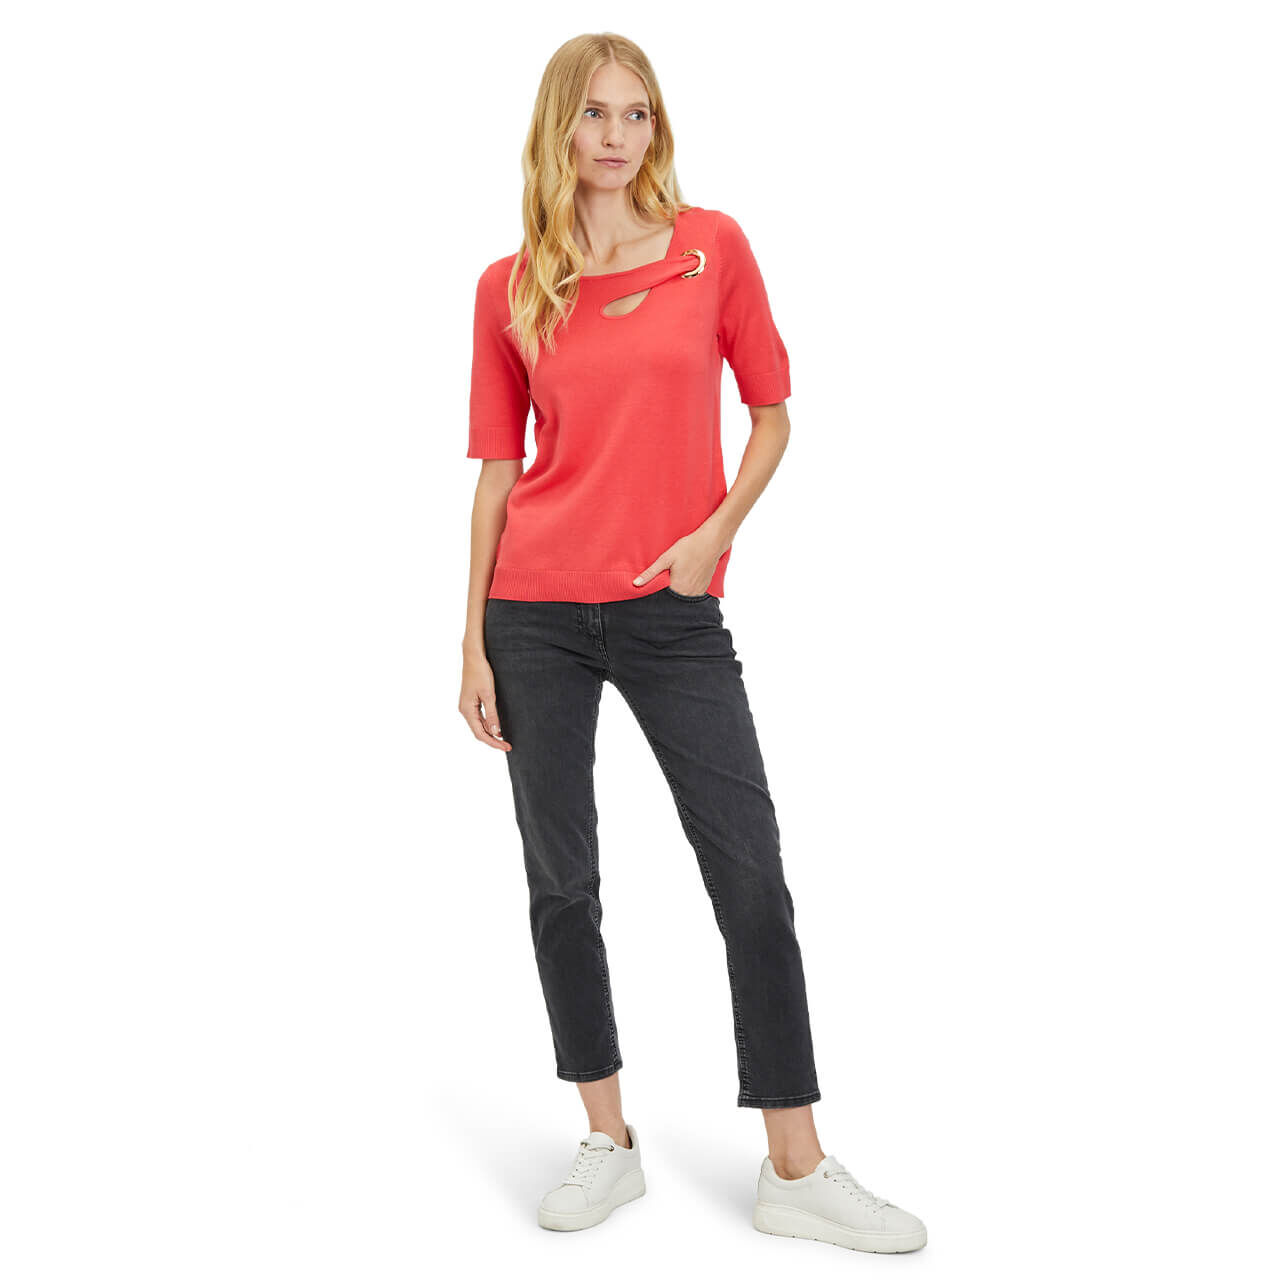 Betty Barclay Damen Kurzarm Pullover coral red